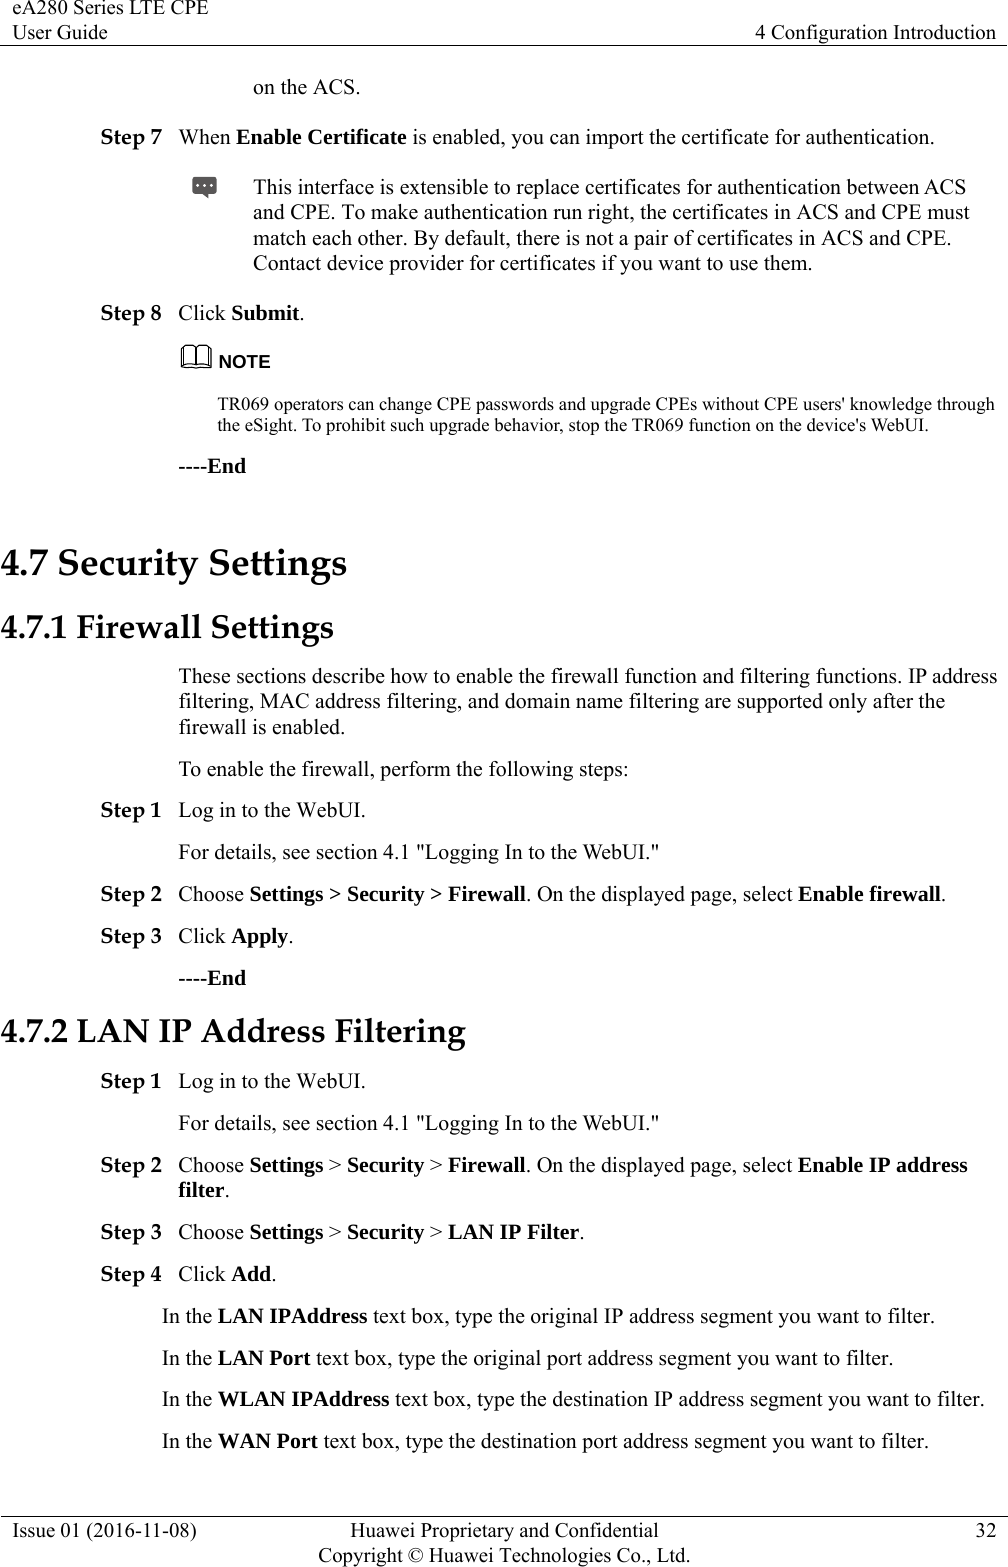 eA280 Series LTE CPE User Guide  4 Configuration Introduction Issue 01 (2016-11-08)  Huawei Proprietary and Confidential         Copyright © Huawei Technologies Co., Ltd.32 on the ACS. Step 7 When Enable Certificate is enabled, you can import the certificate for authentication.  This interface is extensible to replace certificates for authentication between ACS and CPE. To make authentication run right, the certificates in ACS and CPE must match each other. By default, there is not a pair of certificates in ACS and CPE. Contact device provider for certificates if you want to use them. Step 8 Click Submit. NOTE TR069 operators can change CPE passwords and upgrade CPEs without CPE users&apos; knowledge through the eSight. To prohibit such upgrade behavior, stop the TR069 function on the device&apos;s WebUI. ----End 4.7 Security Settings 4.7.1 Firewall Settings These sections describe how to enable the firewall function and filtering functions. IP address filtering, MAC address filtering, and domain name filtering are supported only after the firewall is enabled.   To enable the firewall, perform the following steps:   Step 1 Log in to the WebUI. For details, see section 4.1 &quot;Logging In to the WebUI.&quot; Step 2 Choose Settings &gt; Security &gt; Firewall. On the displayed page, select Enable firewall.  Step 3 Click Apply. ----End 4.7.2 LAN IP Address Filtering Step 1 Log in to the WebUI. For details, see section 4.1 &quot;Logging In to the WebUI.&quot; Step 2 Choose Settings &gt; Security &gt; Firewall. On the displayed page, select Enable IP address filter.  Step 3 Choose Settings &gt; Security &gt; LAN IP Filter. Step 4 Click Add. In the LAN IPAddress text box, type the original IP address segment you want to filter. In the LAN Port text box, type the original port address segment you want to filter. In the WLAN IPAddress text box, type the destination IP address segment you want to filter. In the WAN Port text box, type the destination port address segment you want to filter. 